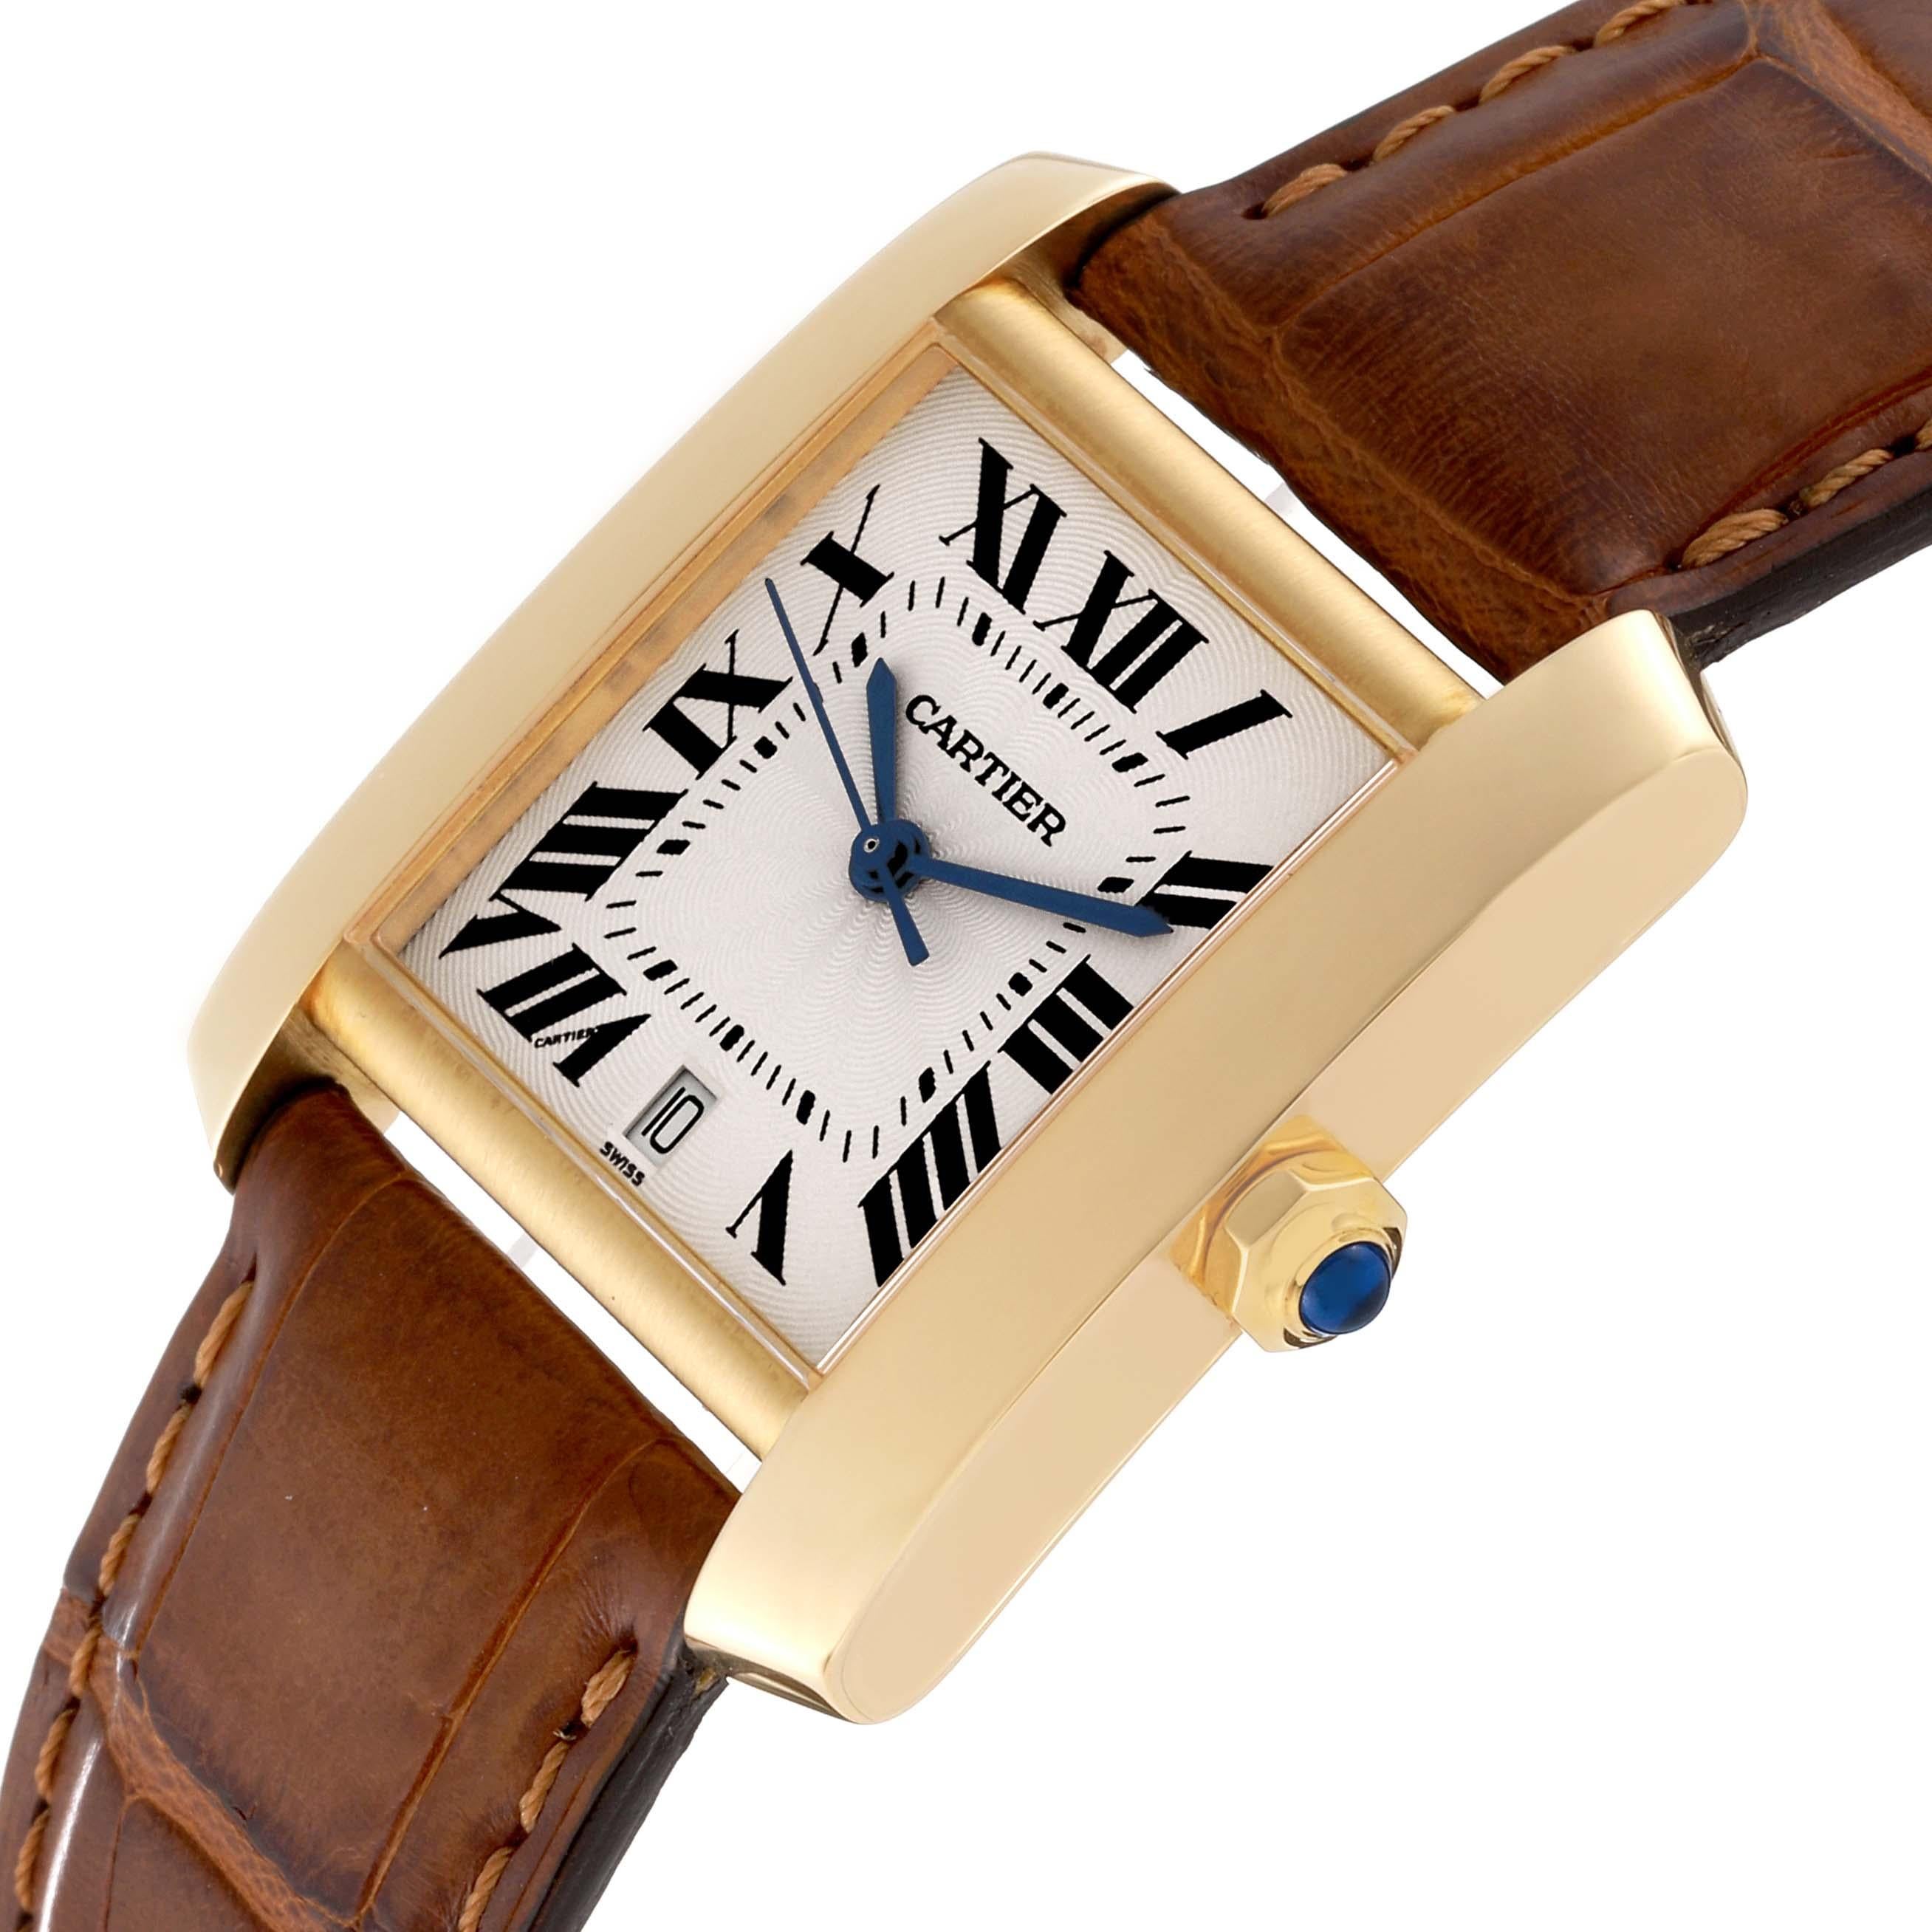 Cartier Tank Francaise Large Yellow Gold Automatic Mens Watch W5000156 For Sale 1